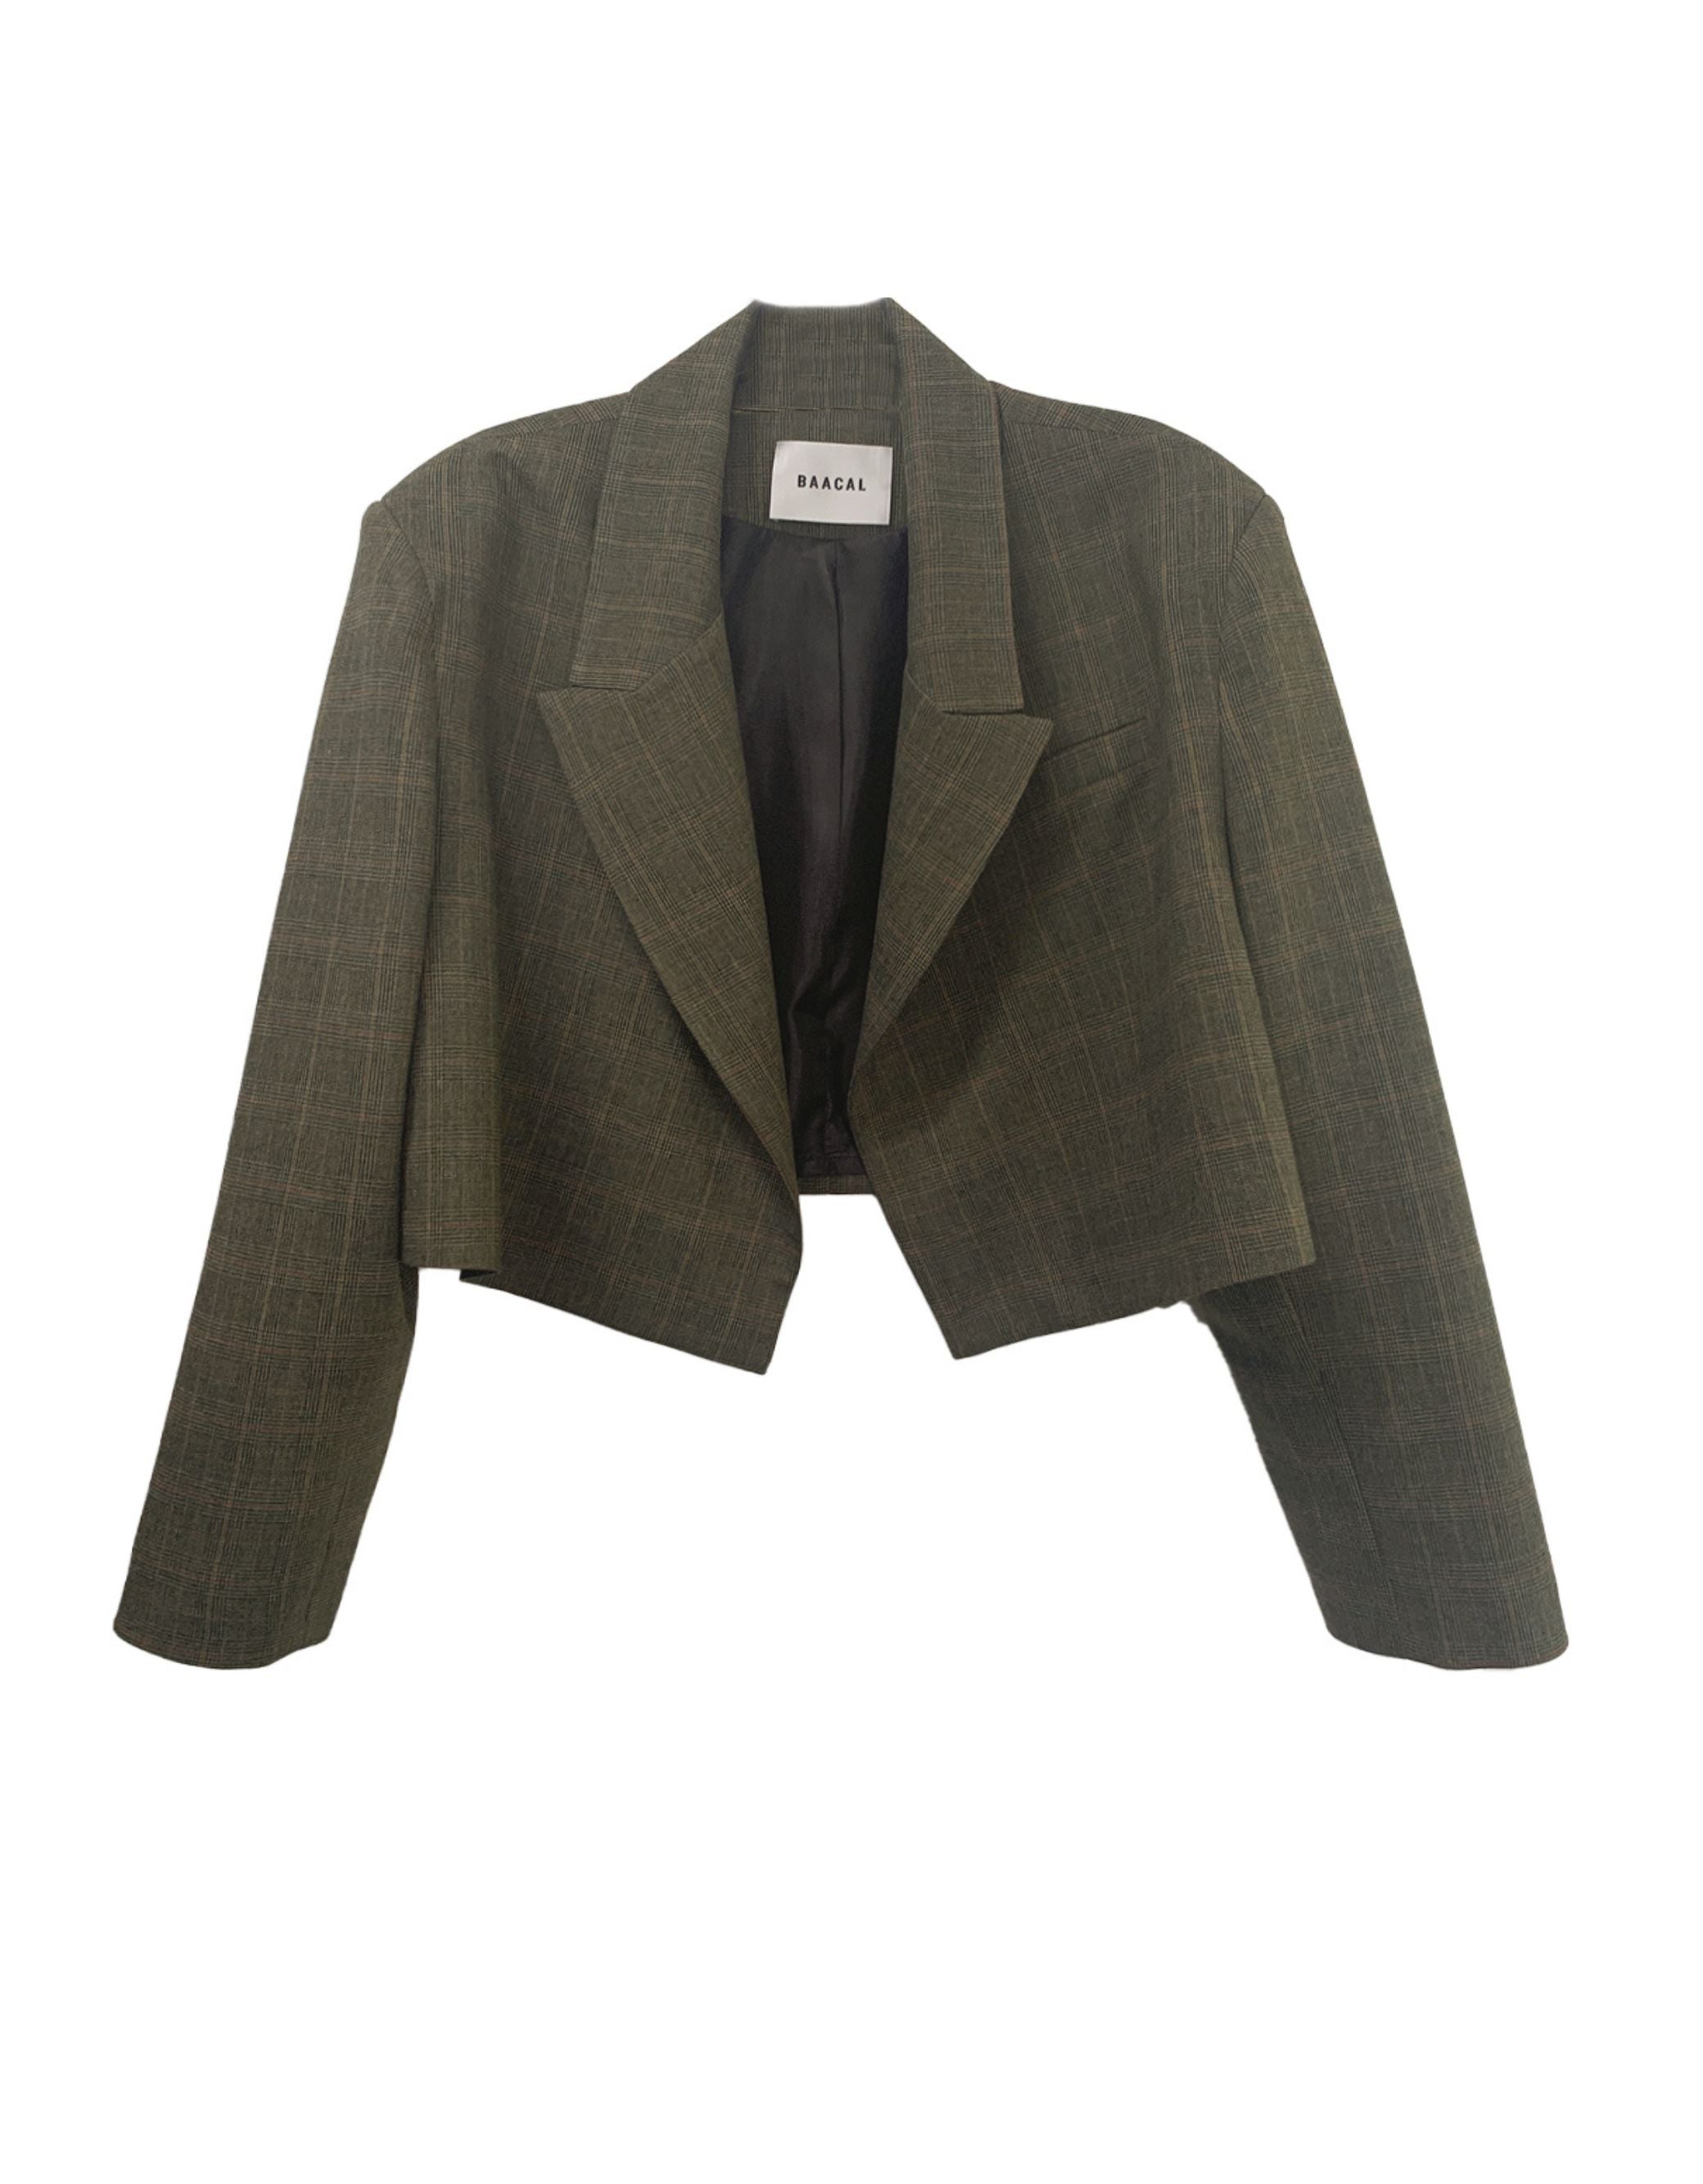 The Crop Blazer is offered here in a subtle Green Grey Prince of Wales plaid. The best Item to update your Fall wardrobe. Perfect to wear open or closed with inside hidden buttons. Made of a lightweight Wool blend, double-breasted with tailored shoulders and buttoned cuffs. A go-anywhere, anyway favorite you will reach for from Fall through Spring. This blazer was made using upcycled material and trims made and tailored in Los Angeles. Good for you and good for the planet.